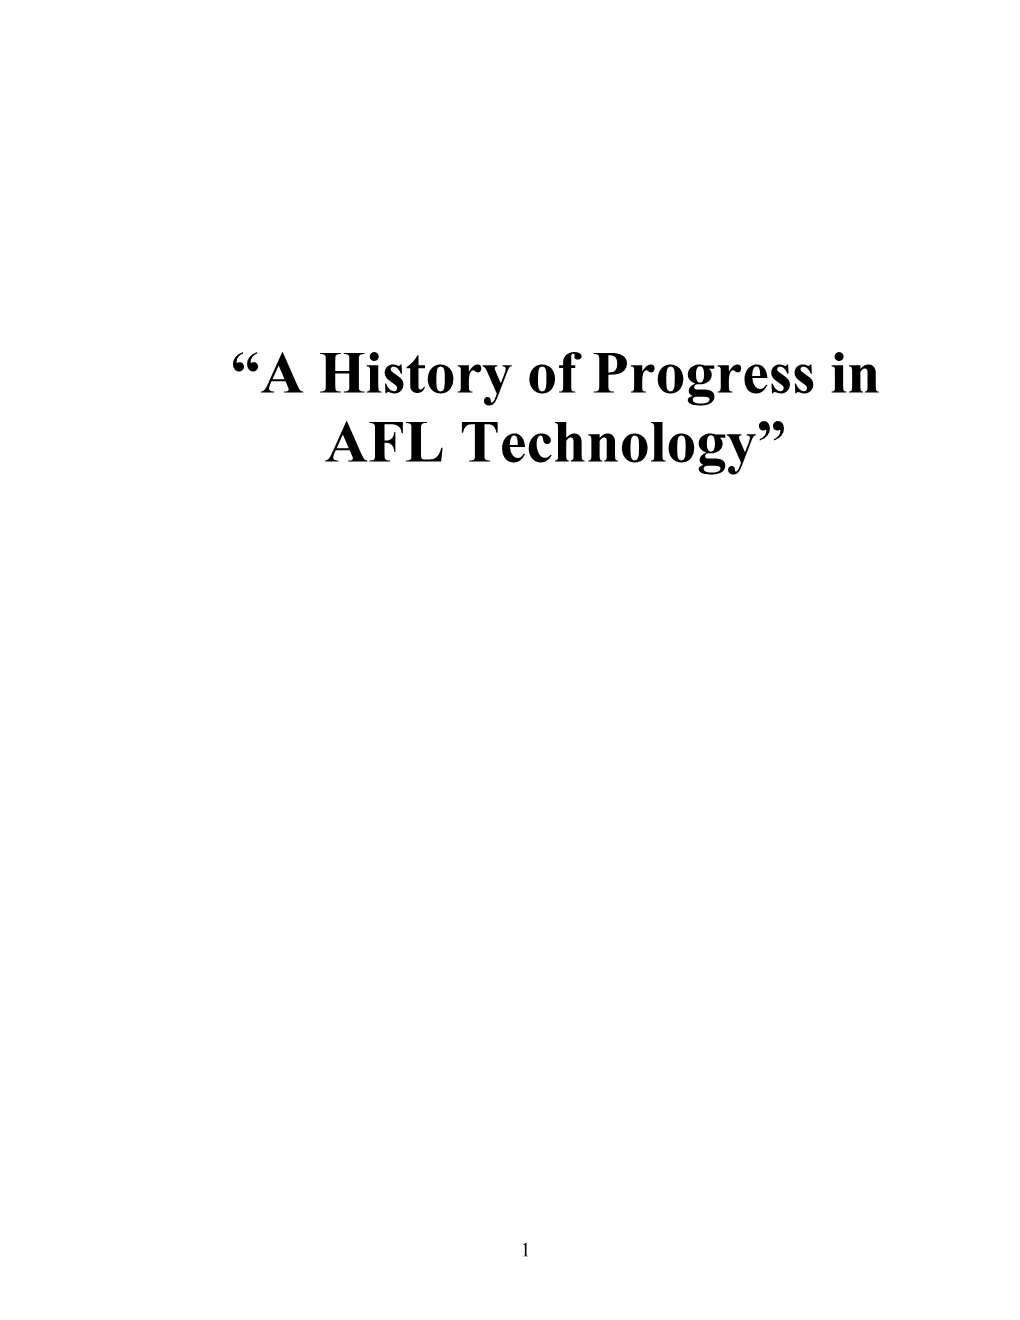 “A History of Progress in AFL Technology”